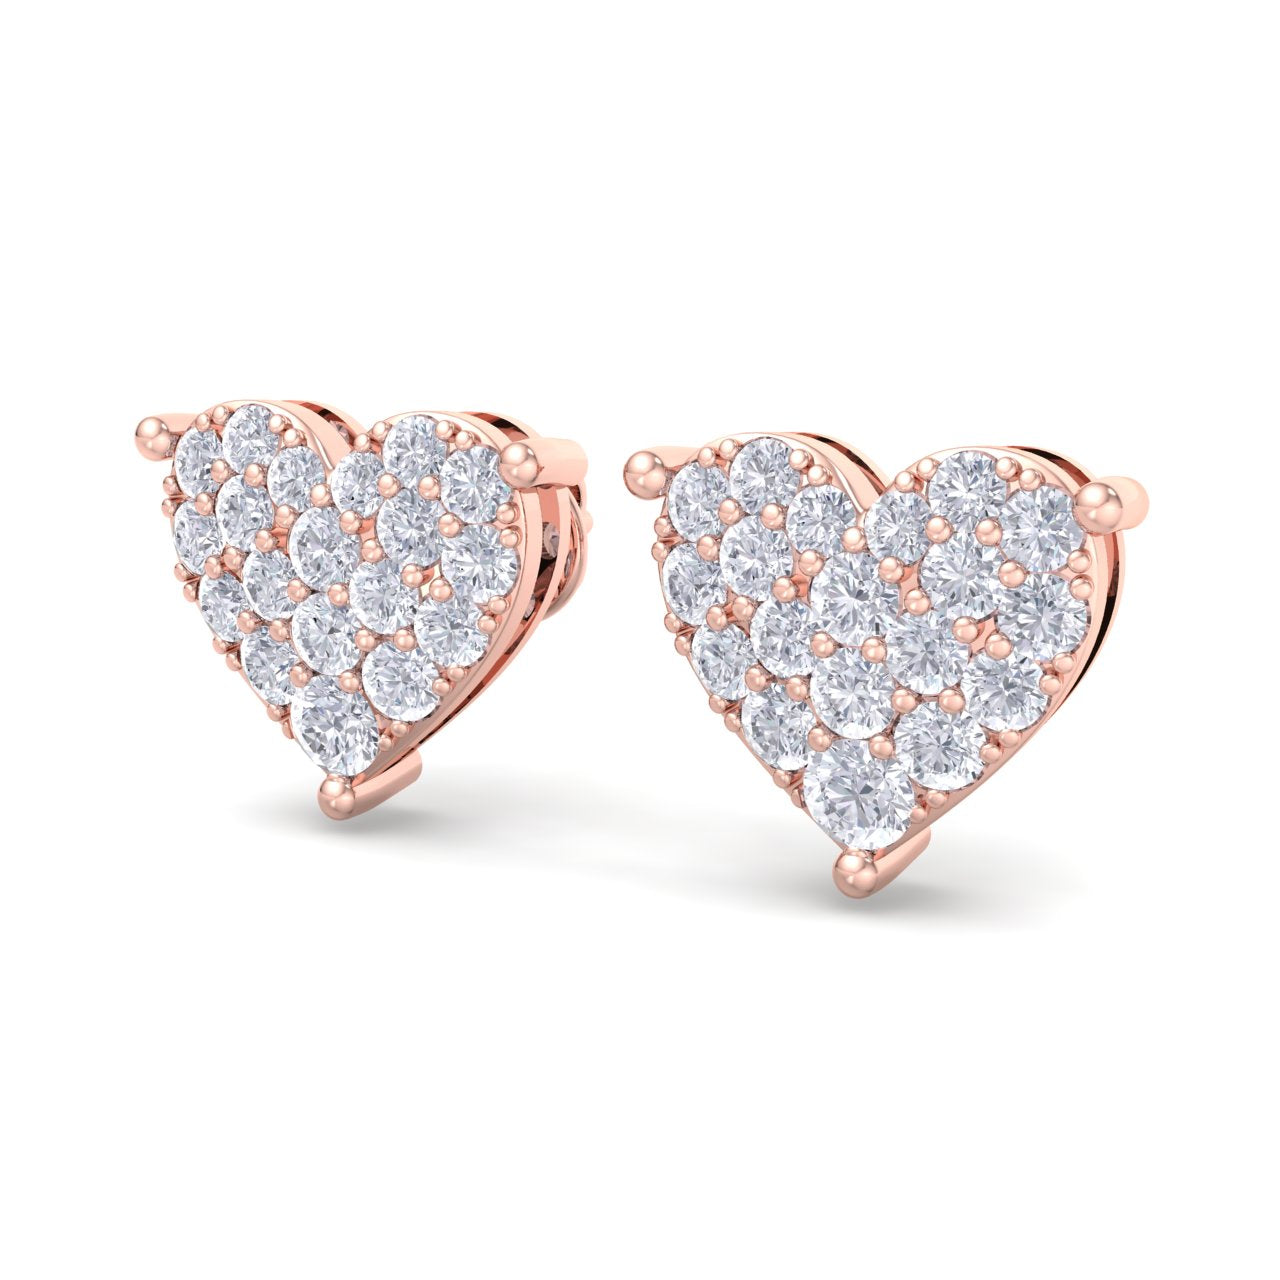 Heart earrings in rose gold with white diamonds of 1.44 ct in weight